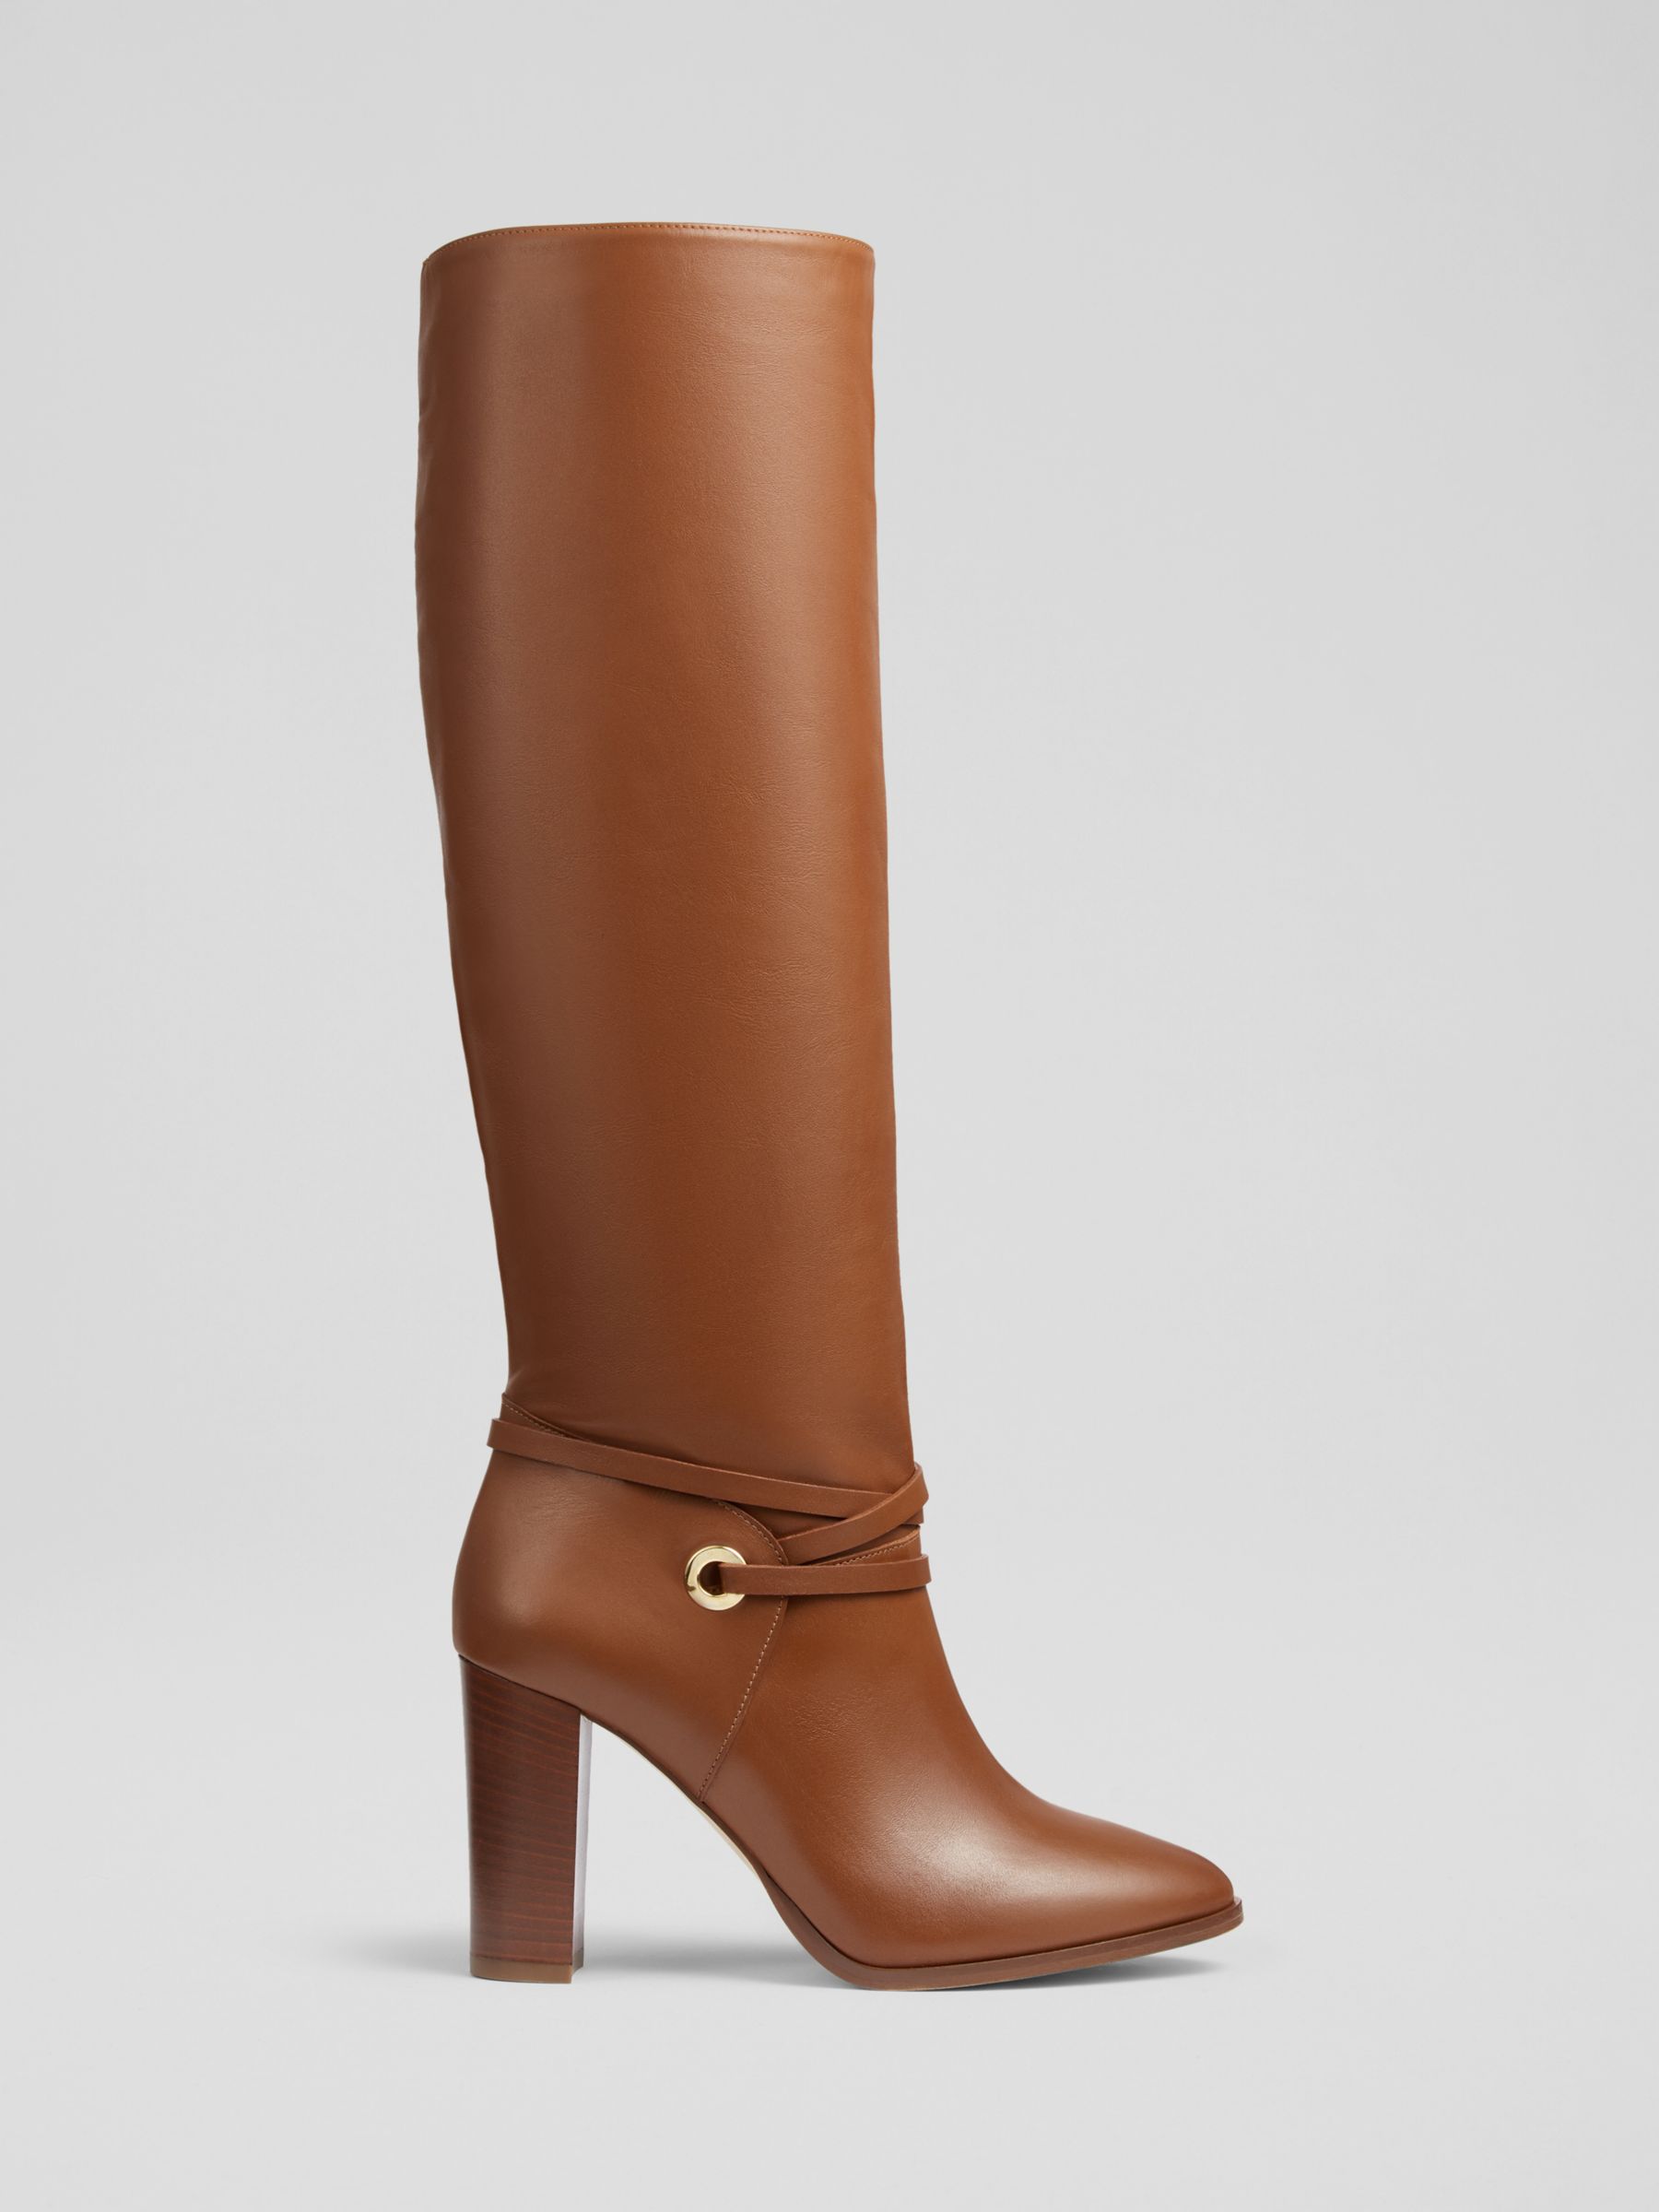 L.K.Bennett x Ascot Collection: Shelby Nappa Leather Knee Boots, Tan-tan